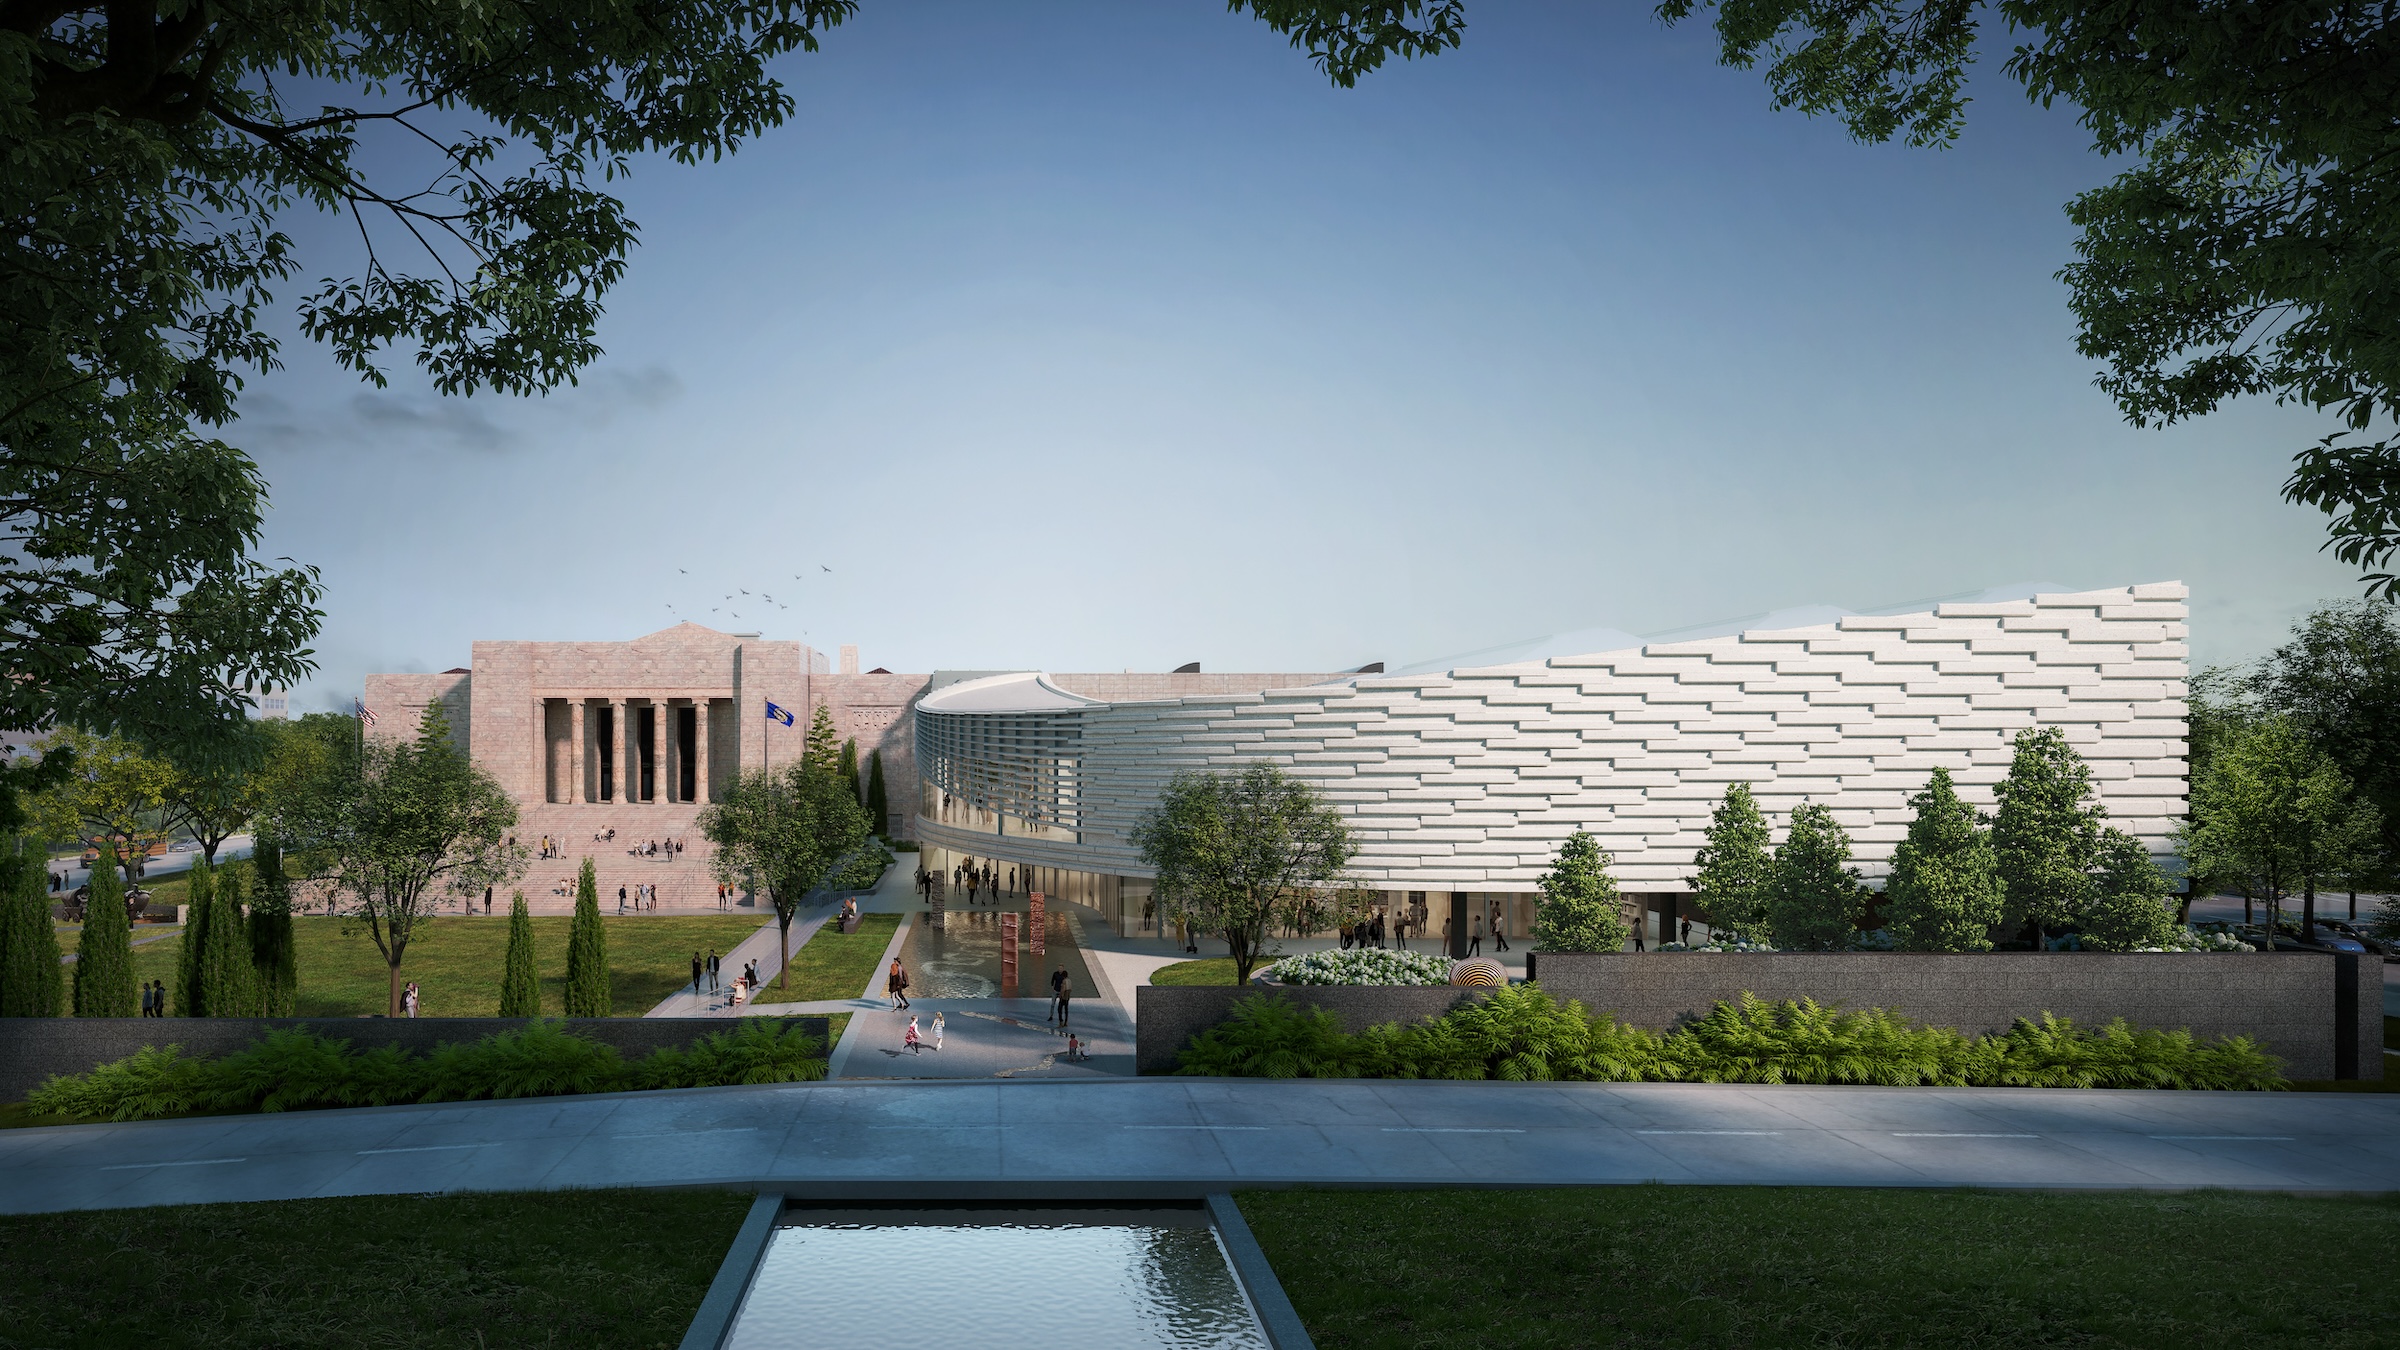 East elevation of the Joslyn Building, Hawks Pavilion, central lawn, and courtyard garden. Rendering courtesy Moare